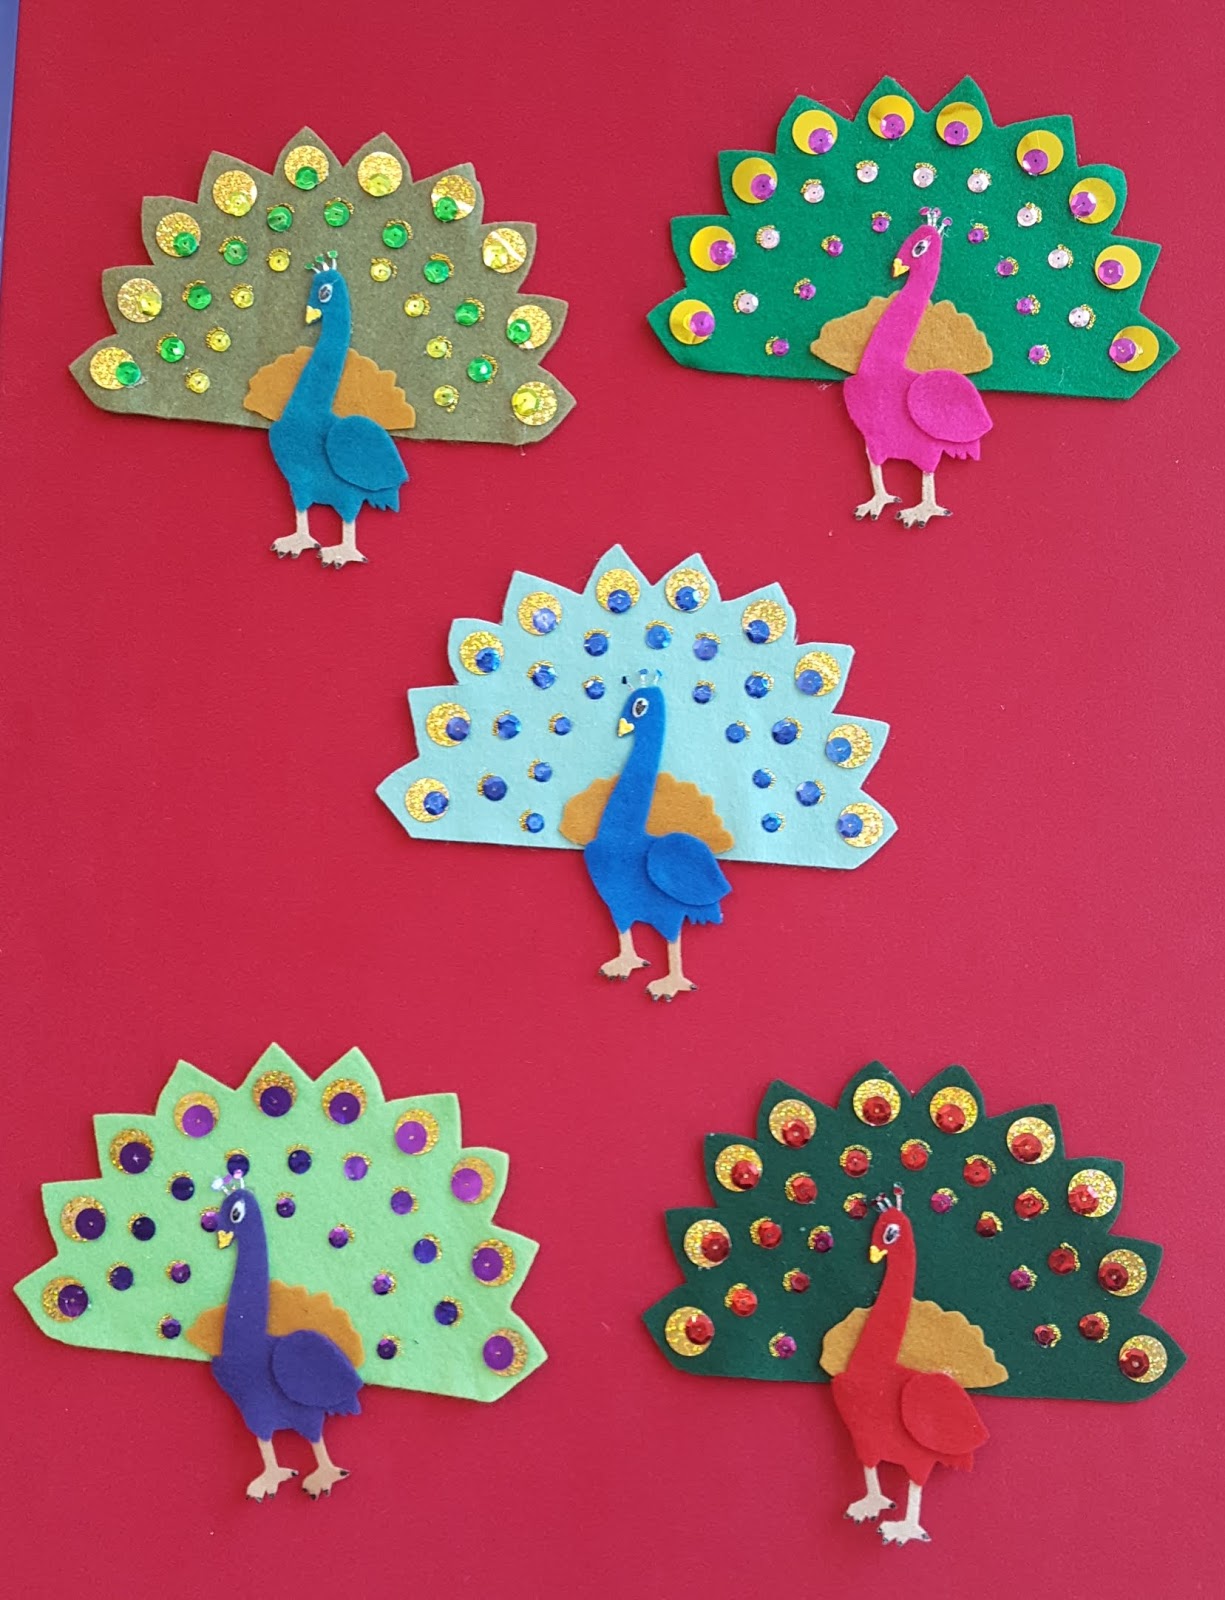 Peacock Gold Construction Paper 